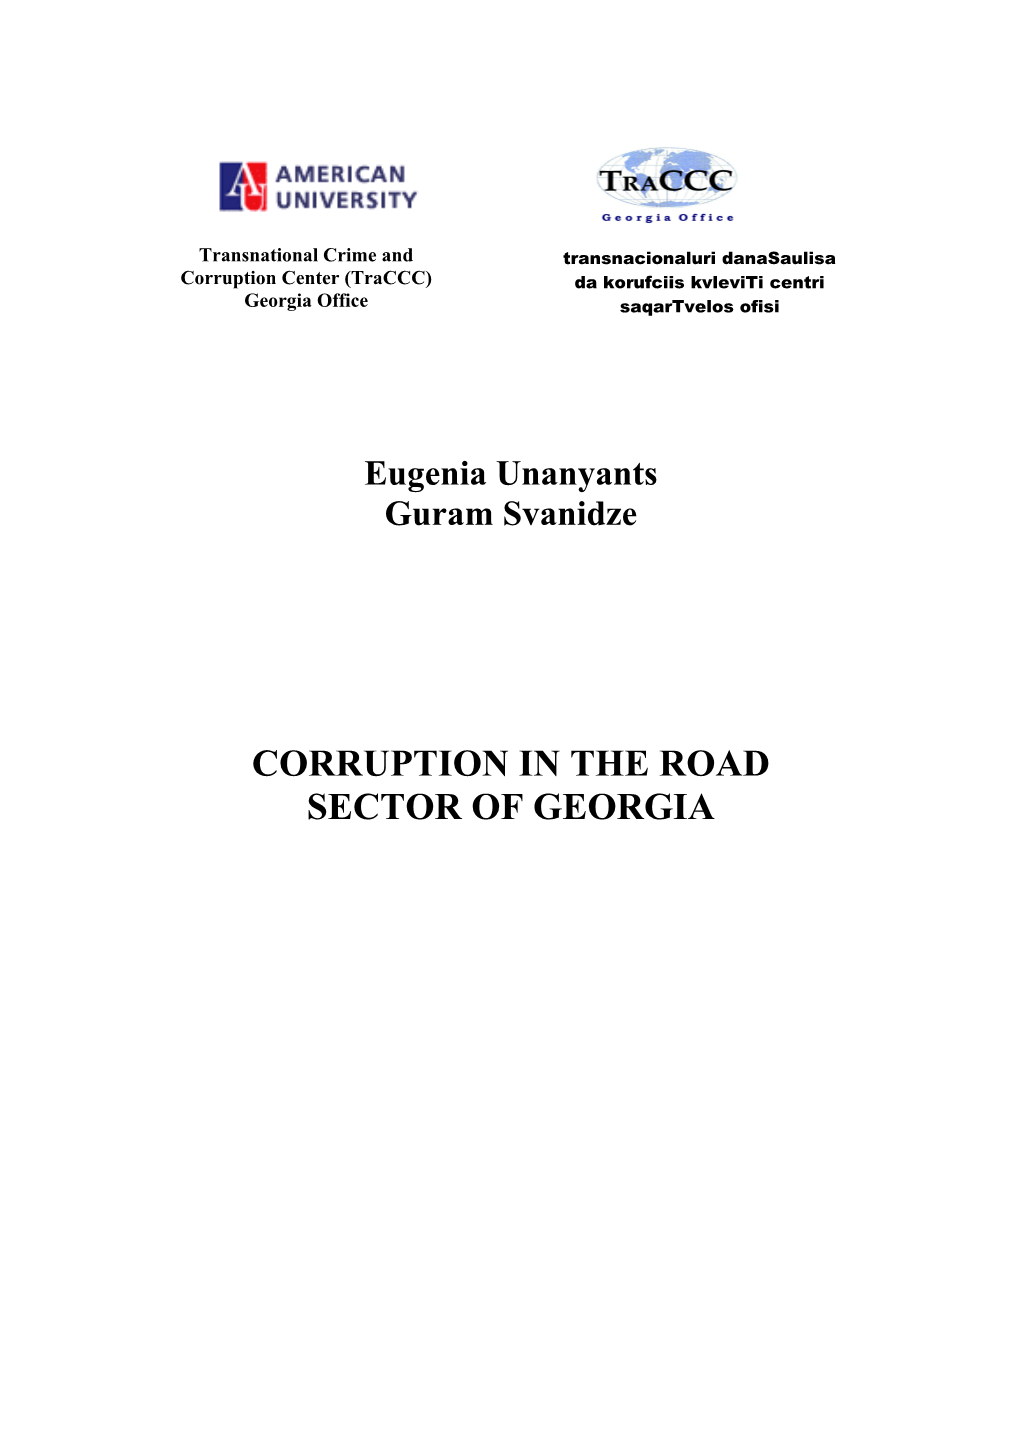 Corruption in the Transport Sector of Georgia